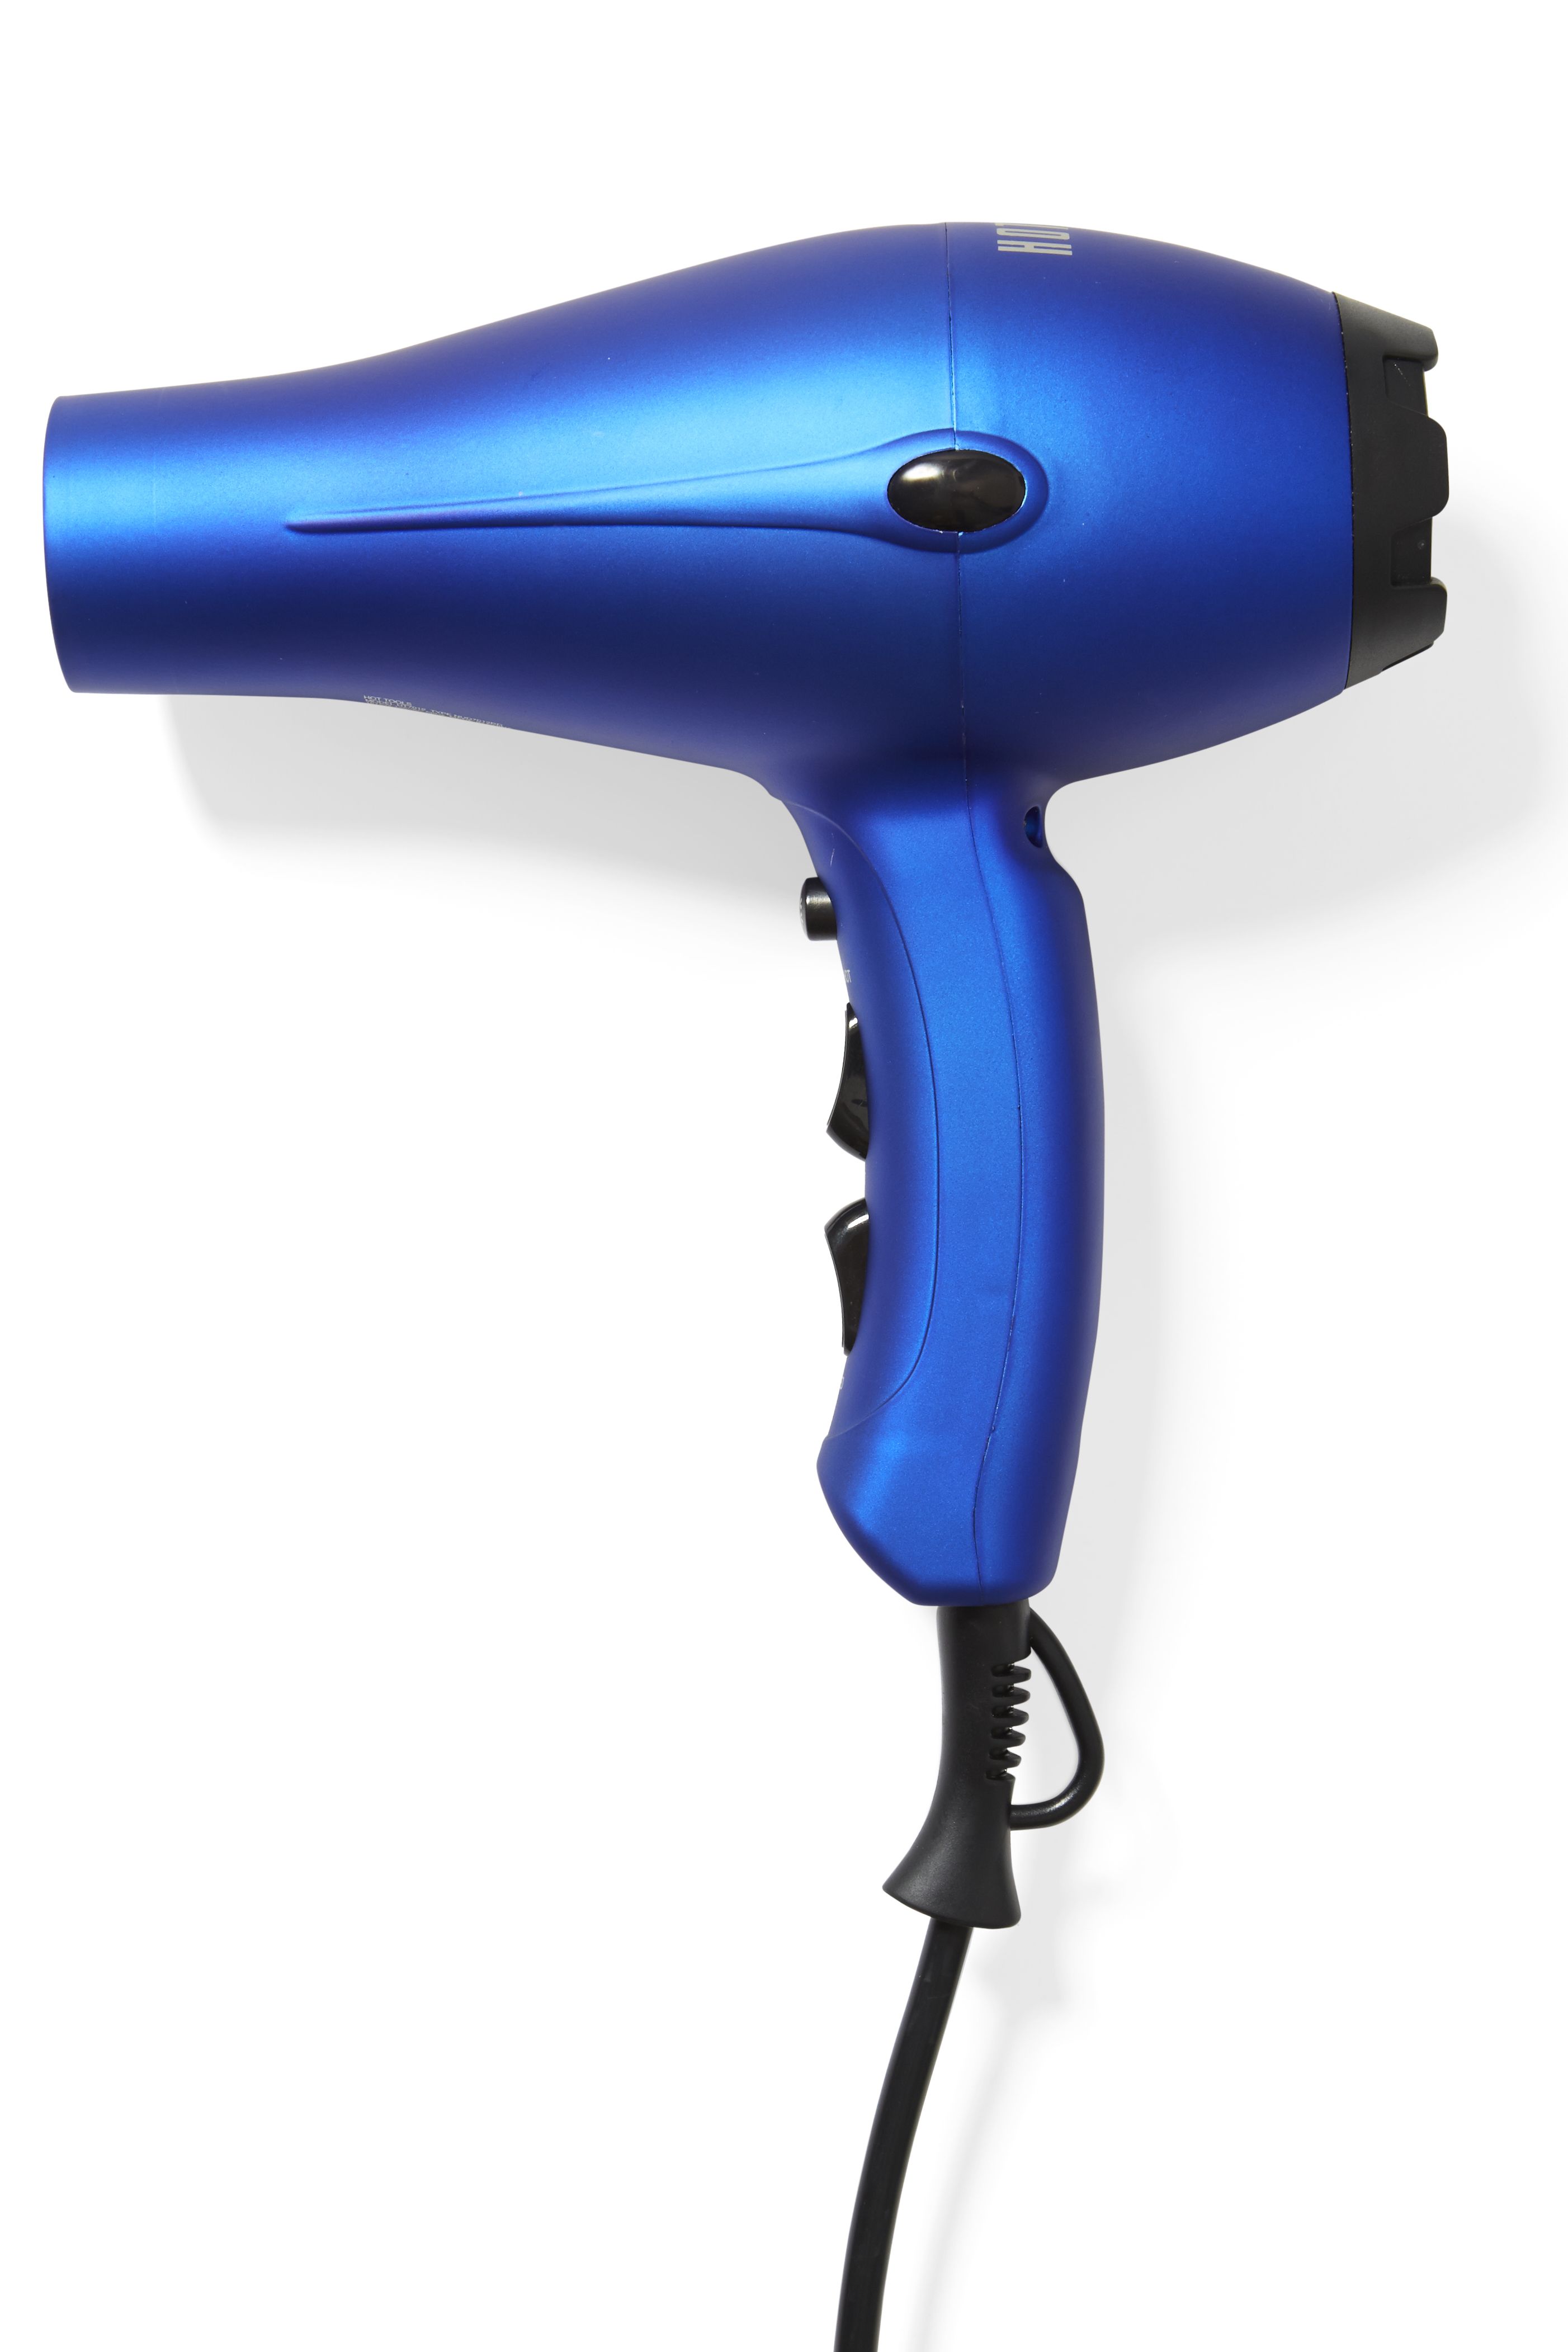 15 Best Hair Dryers 2018 Top Rated Blow Dryer Reviews